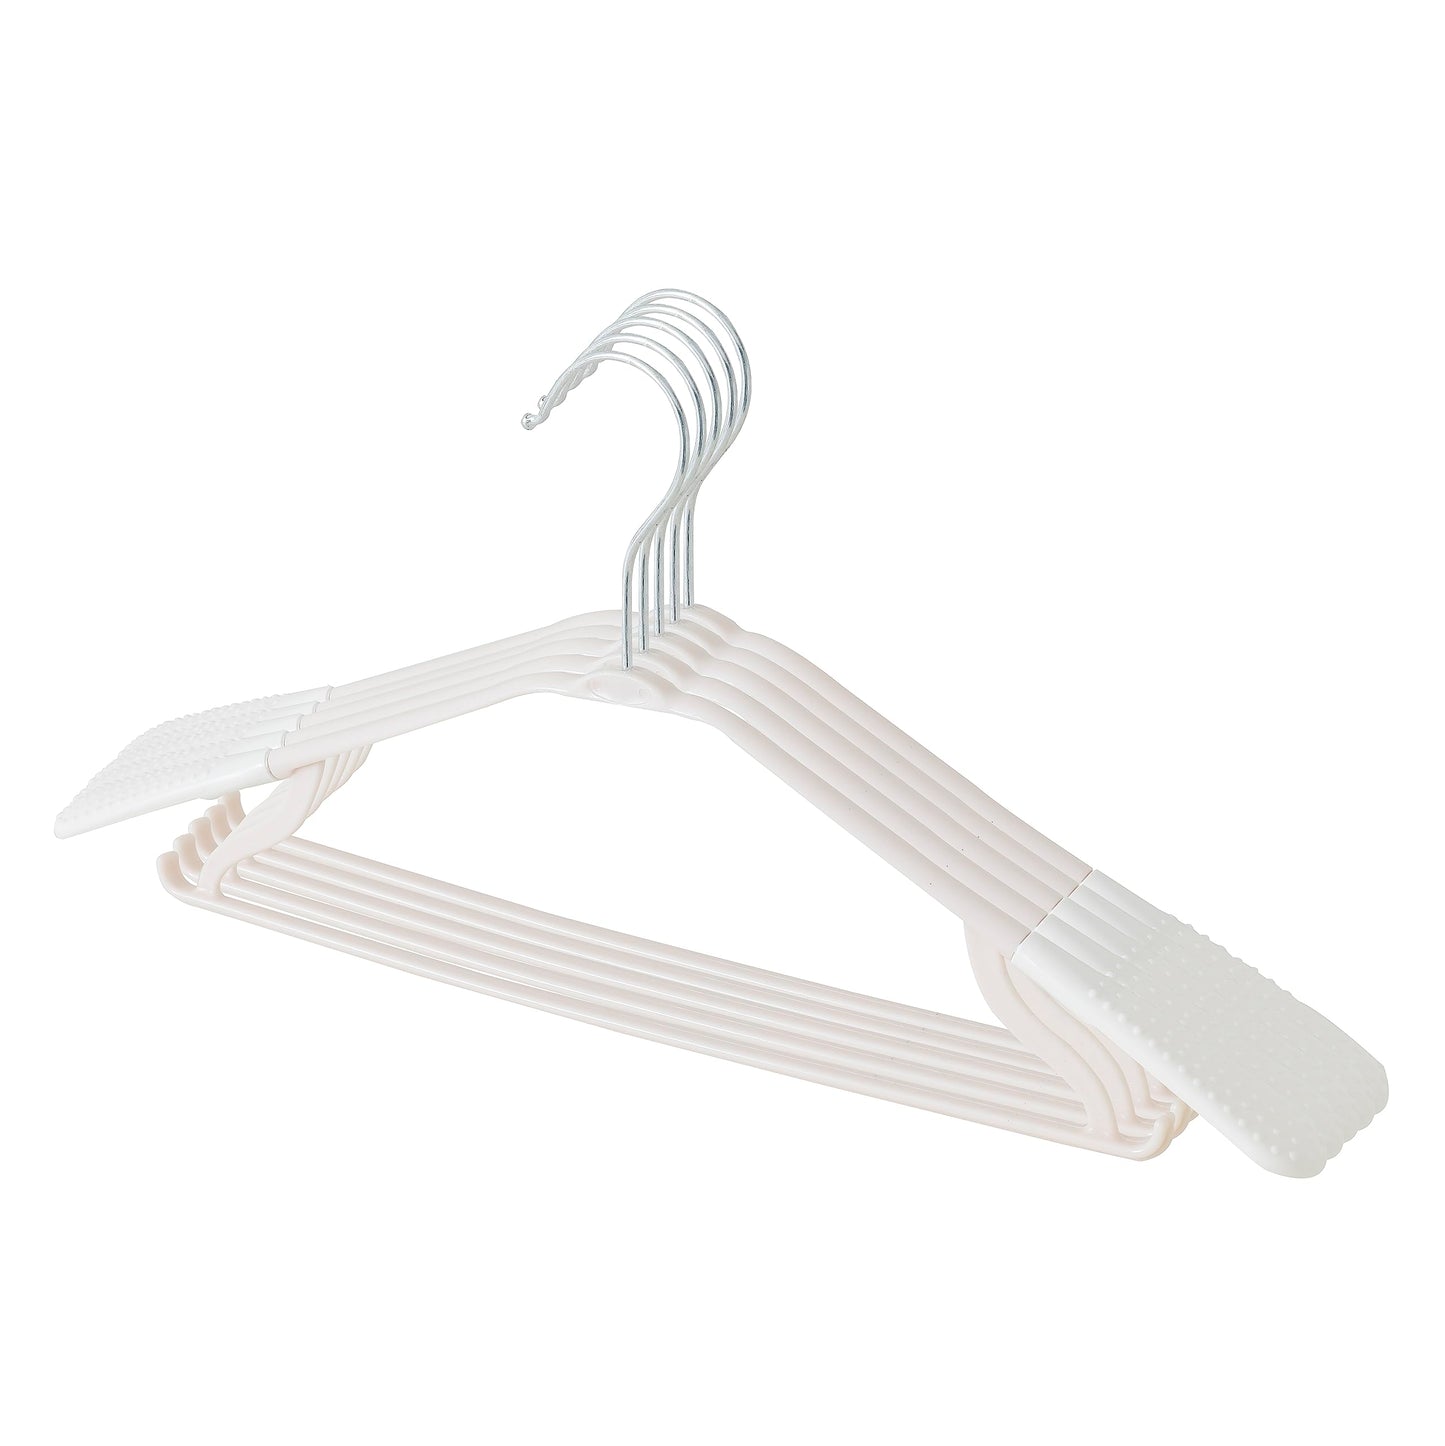 Urbane Home PP Cloth Hanger Set of 5 With Zinc Plated Steel Hook White